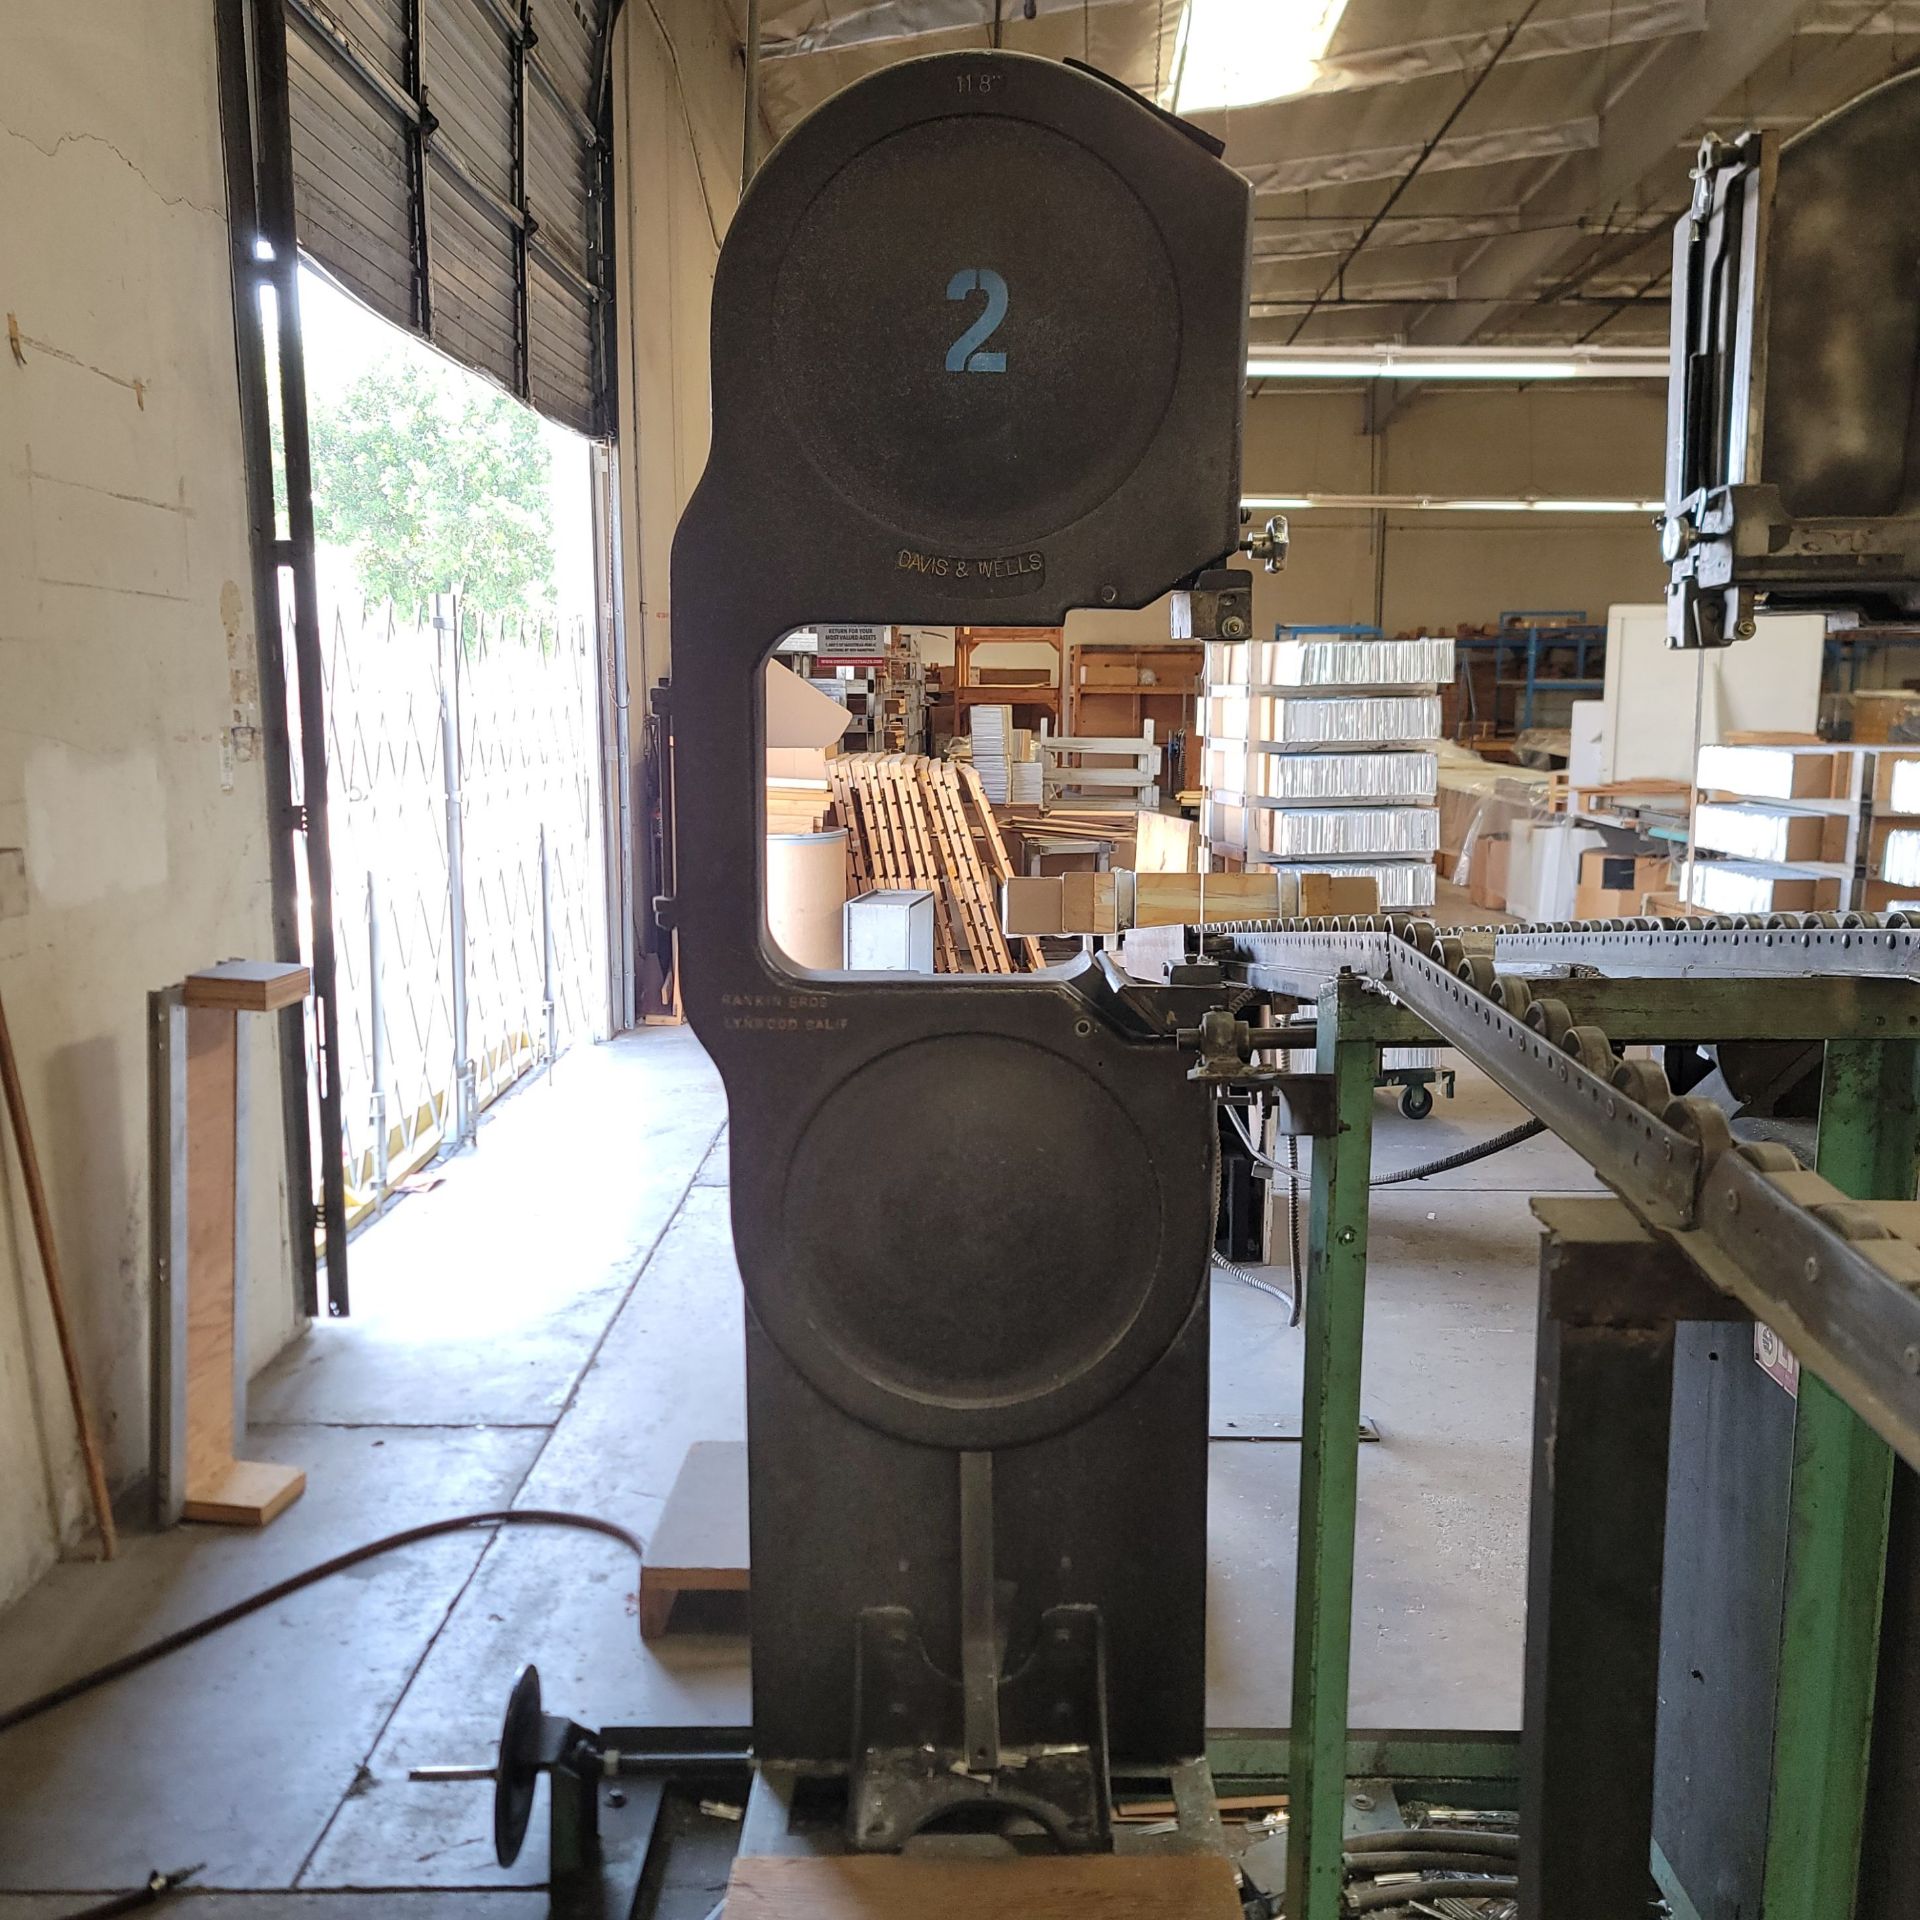 OLIVER MACHINERY VERTICAL BANDSAW, NO. 2520, 19-1/2" THROAT, NO DATA TAG - Image 2 of 2